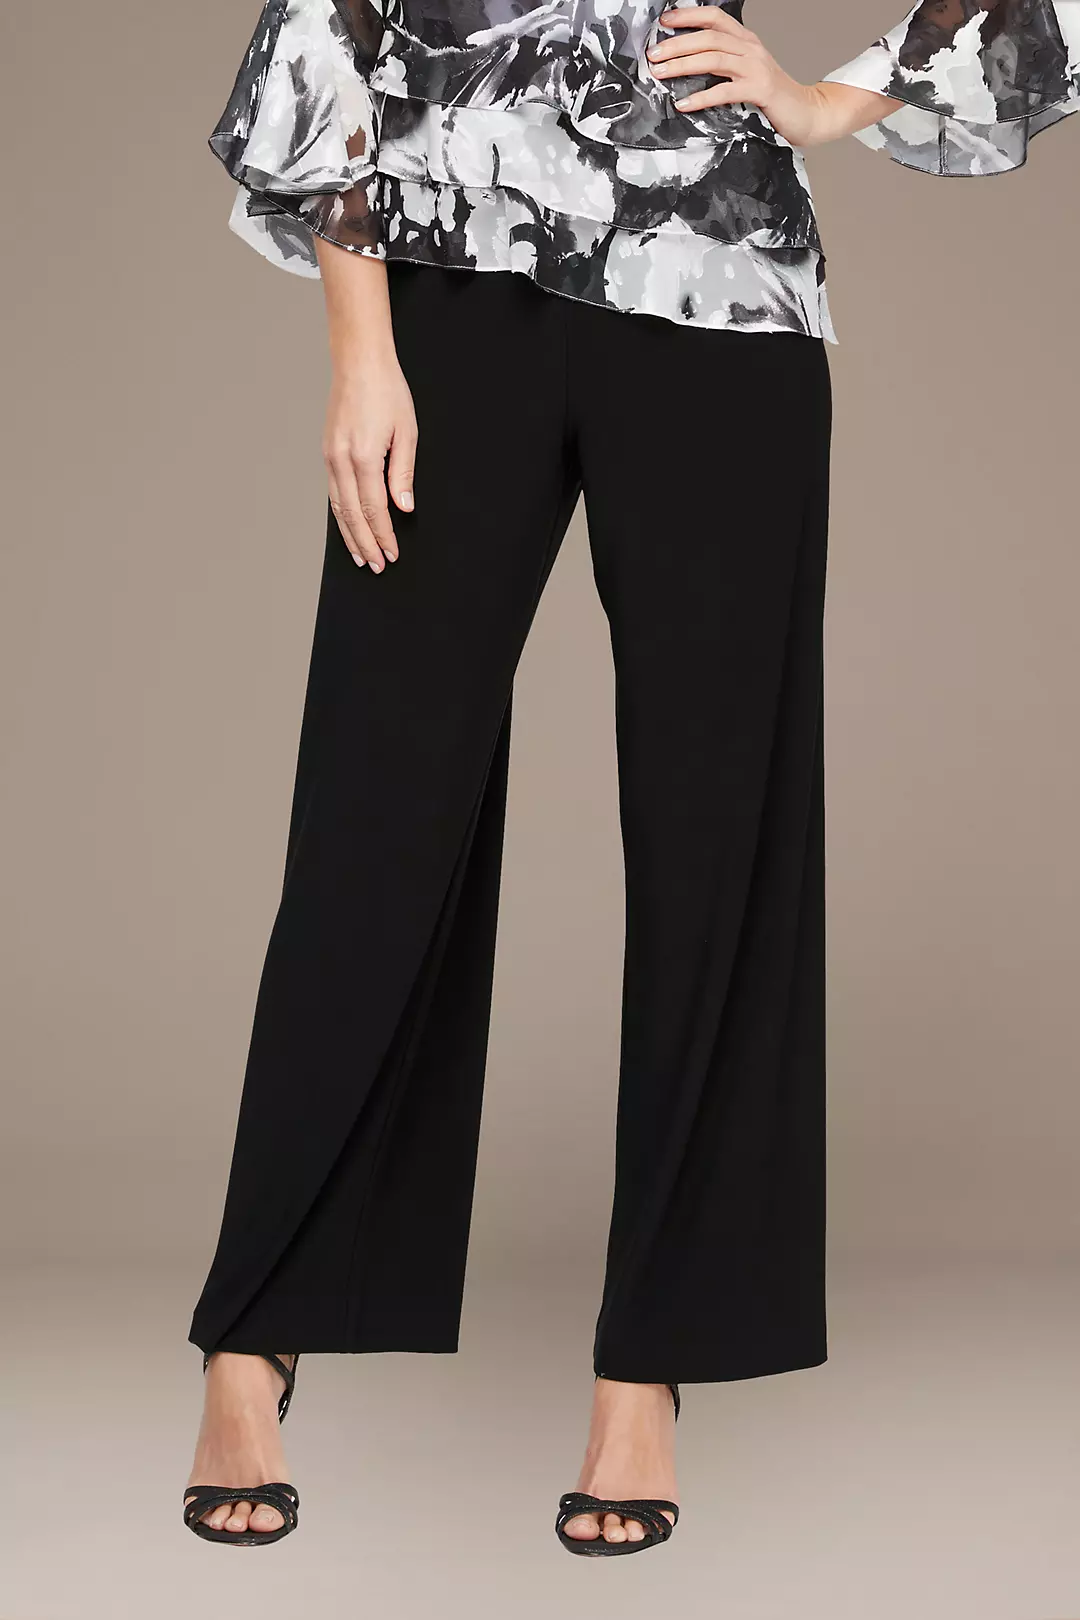 Alex Evenings Special Occasion Chiffon Pull-On Pants